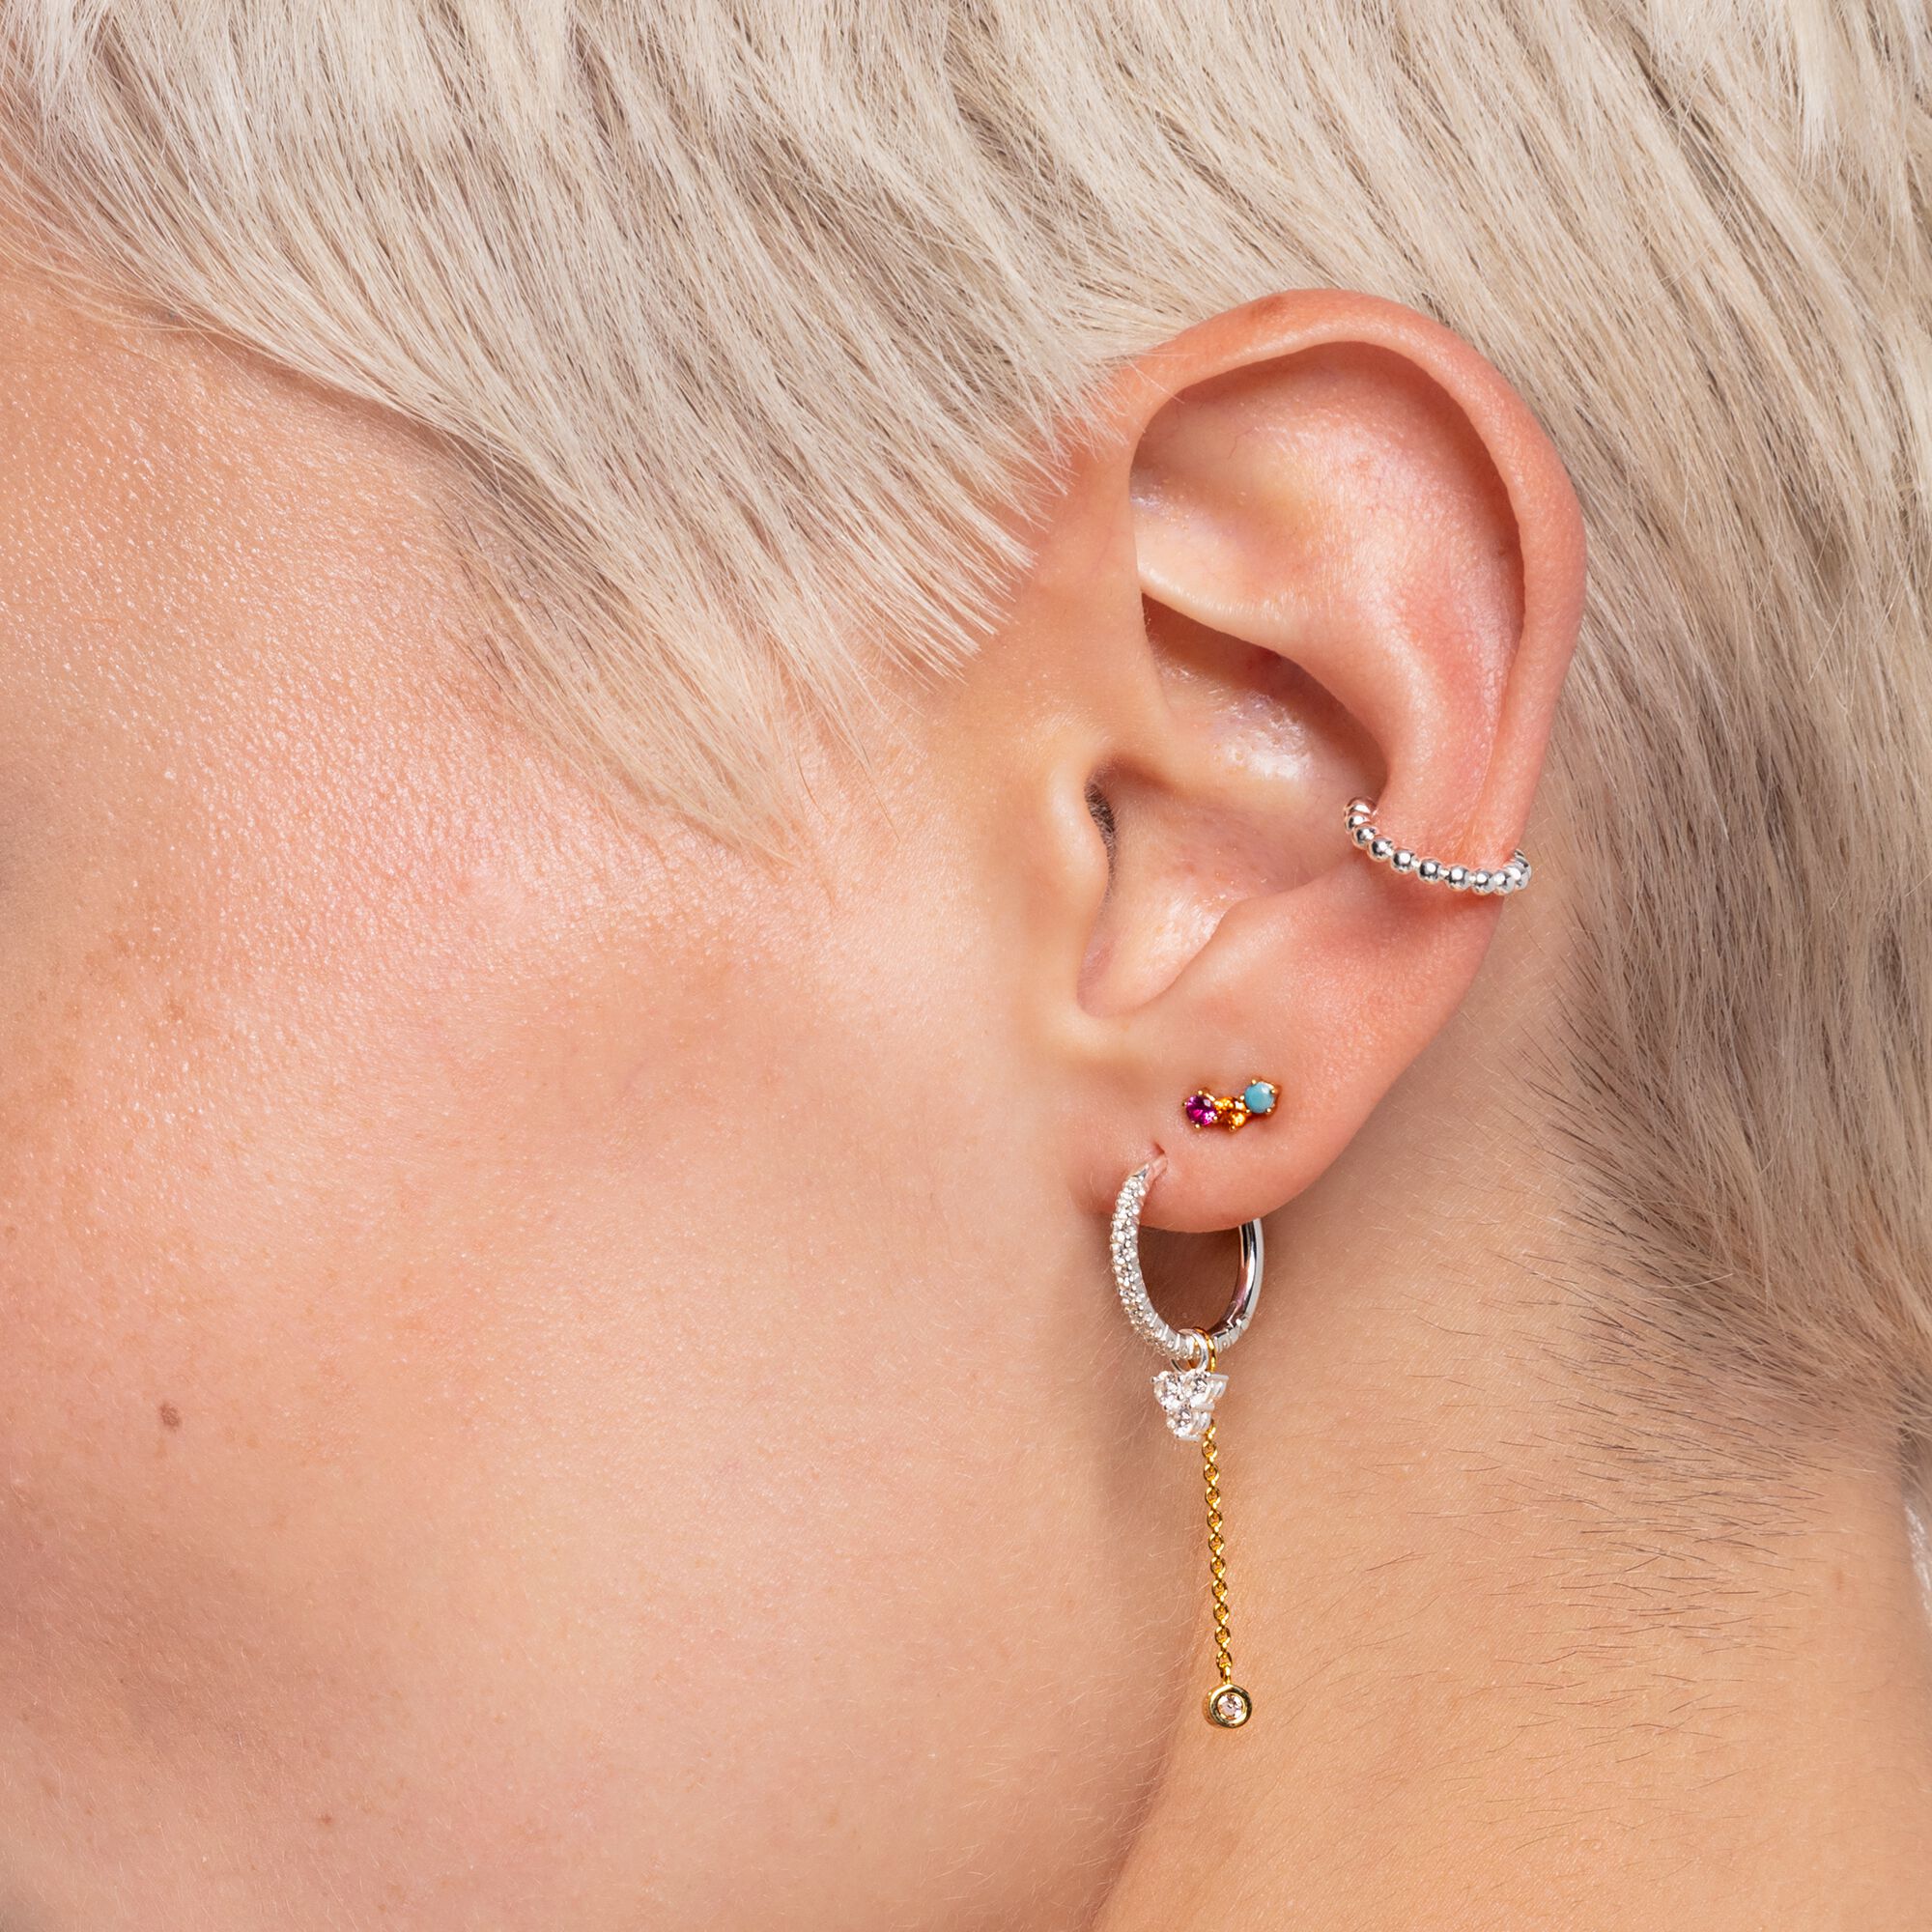 Ear stud with THOMAS │ SABO gold stones in multi-coloured